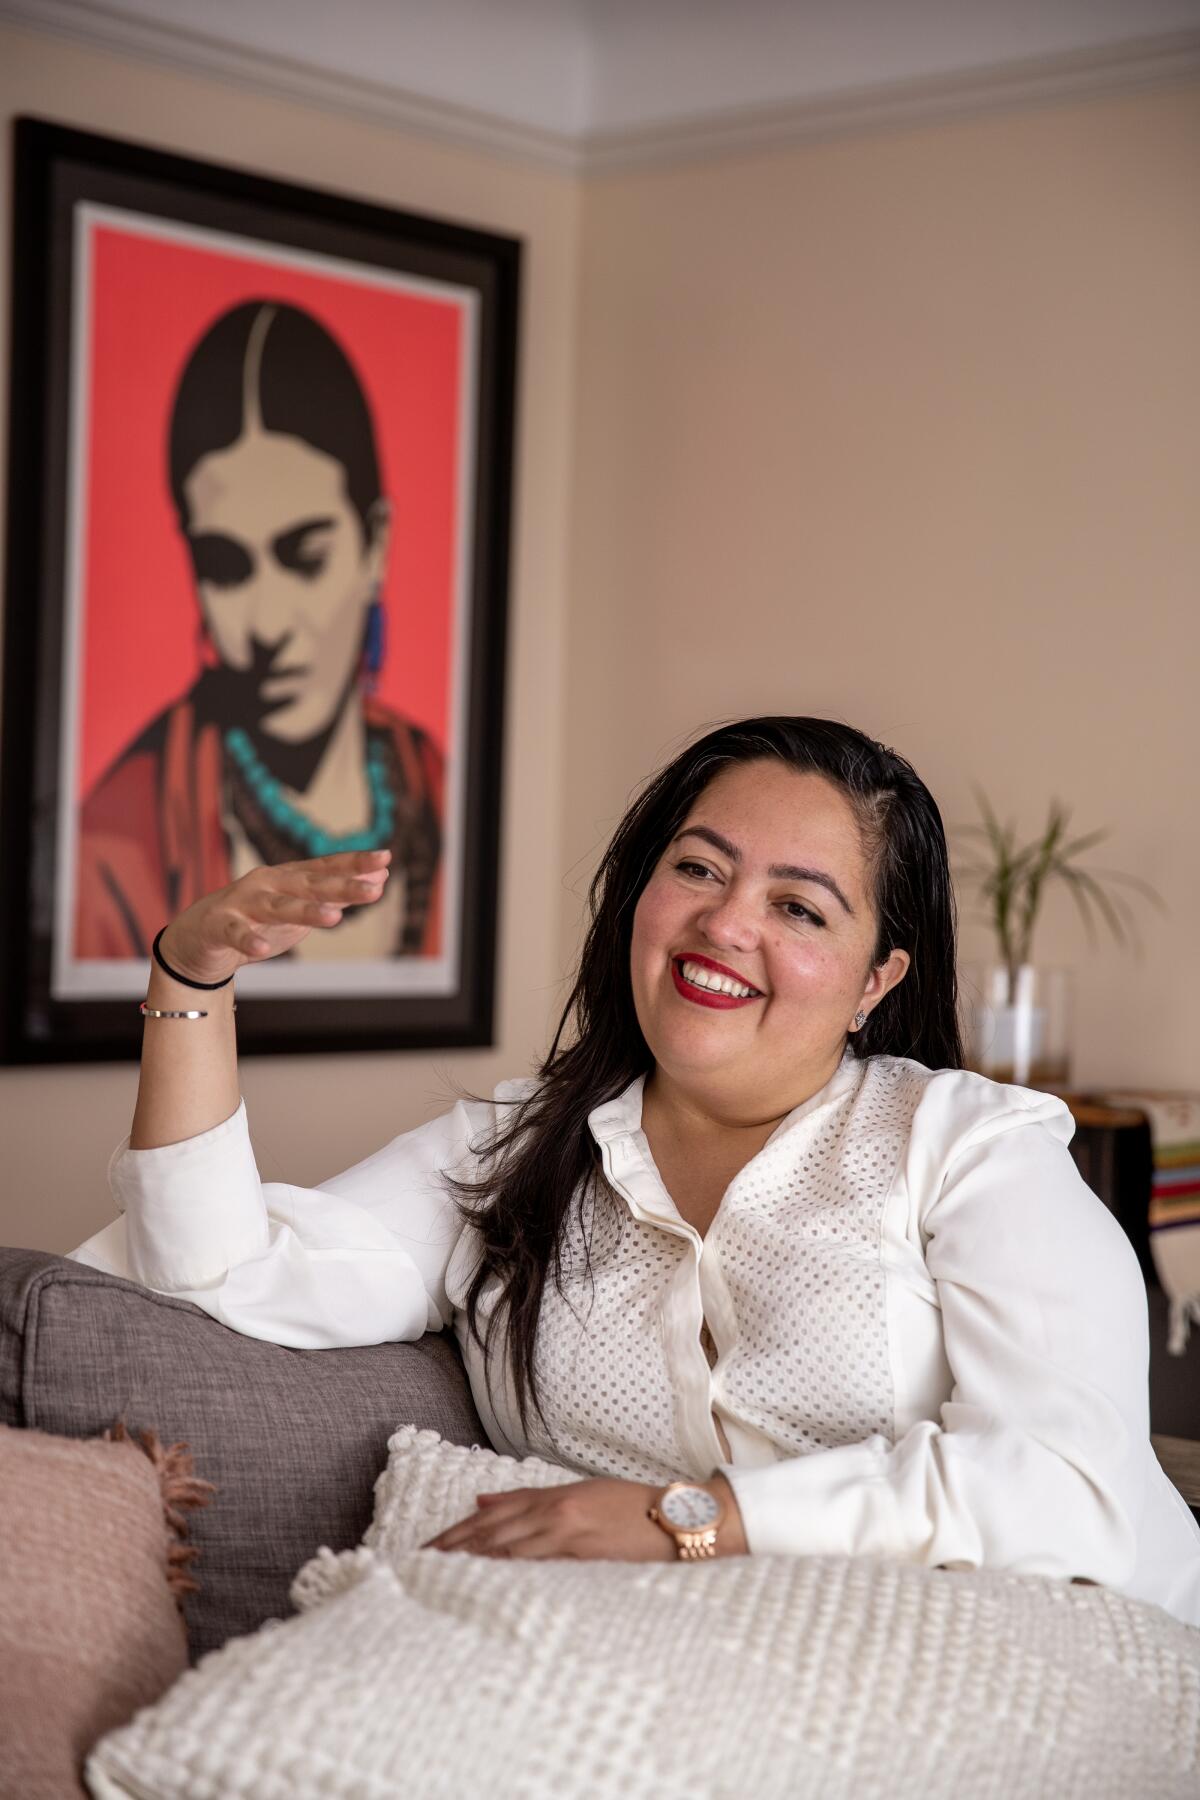 A vertical portrait frame of Wendy Carrillo, seated and gesturing while talking